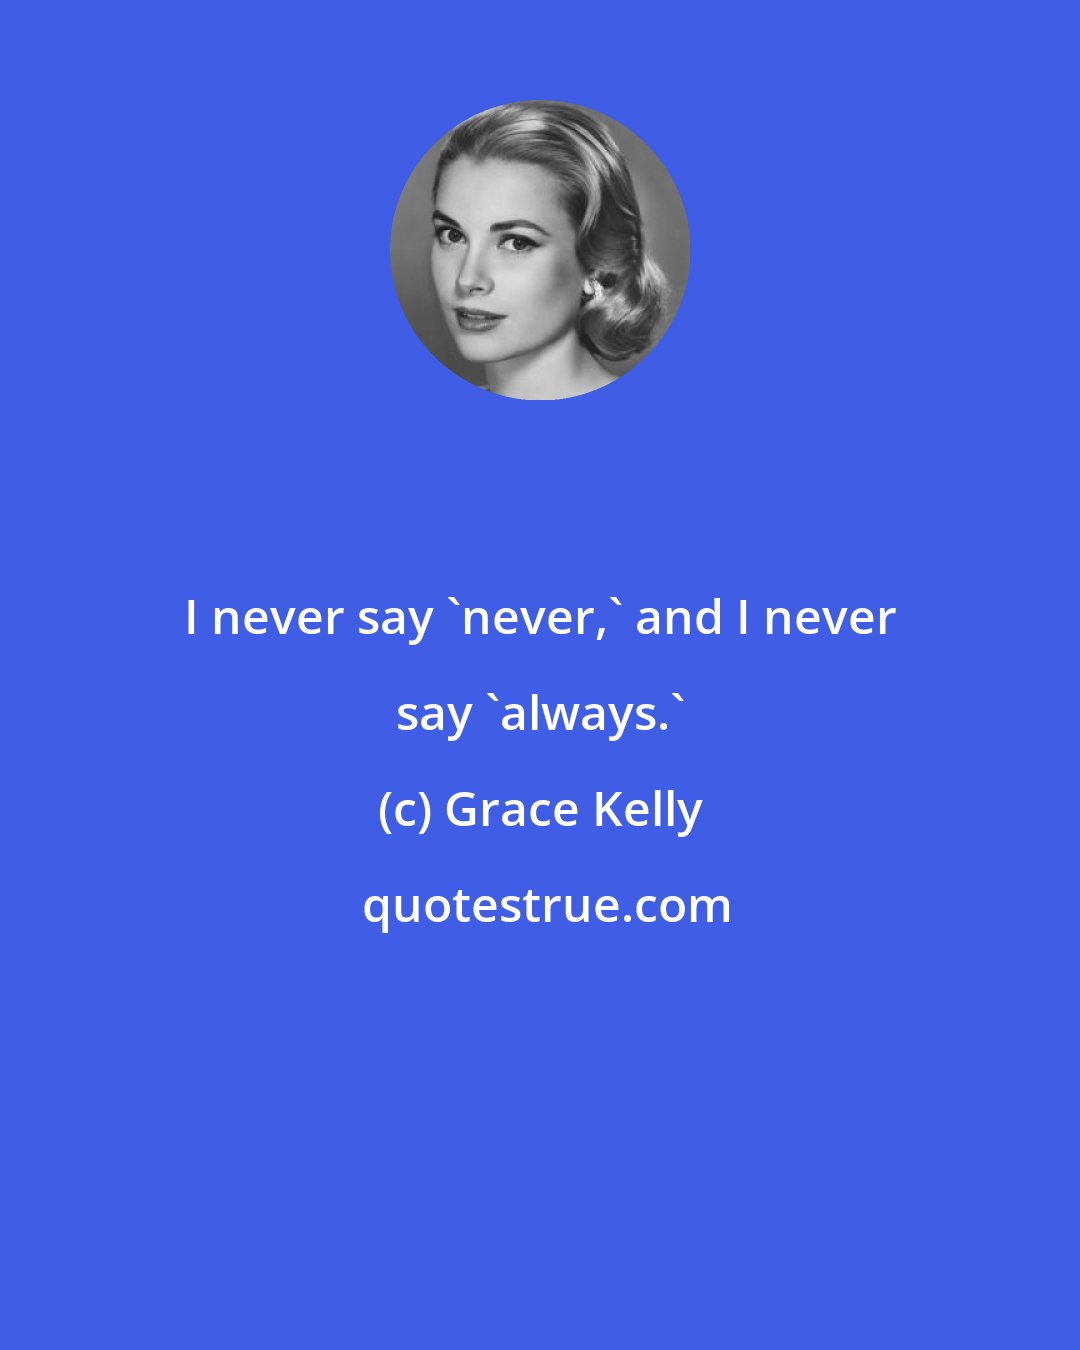 Grace Kelly: I never say 'never,' and I never say 'always.'